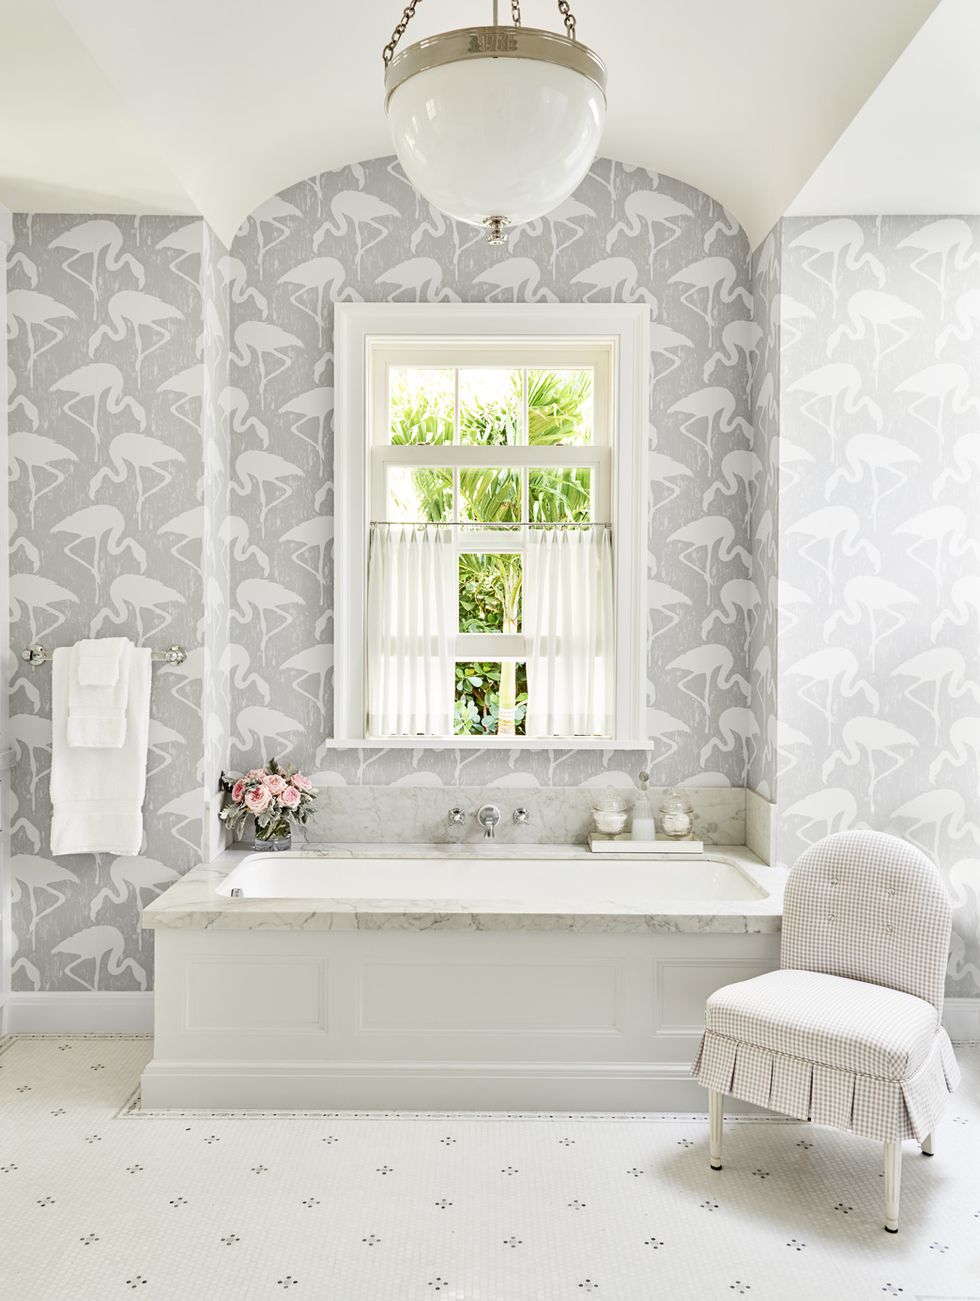 https://hips.hearstapps.com/hmg-prod/images/spa-bathroom-ideas-canisters-phoebe-howard-1652218426.jpg?crop=1xw:1xh;center,top&resize=980:*